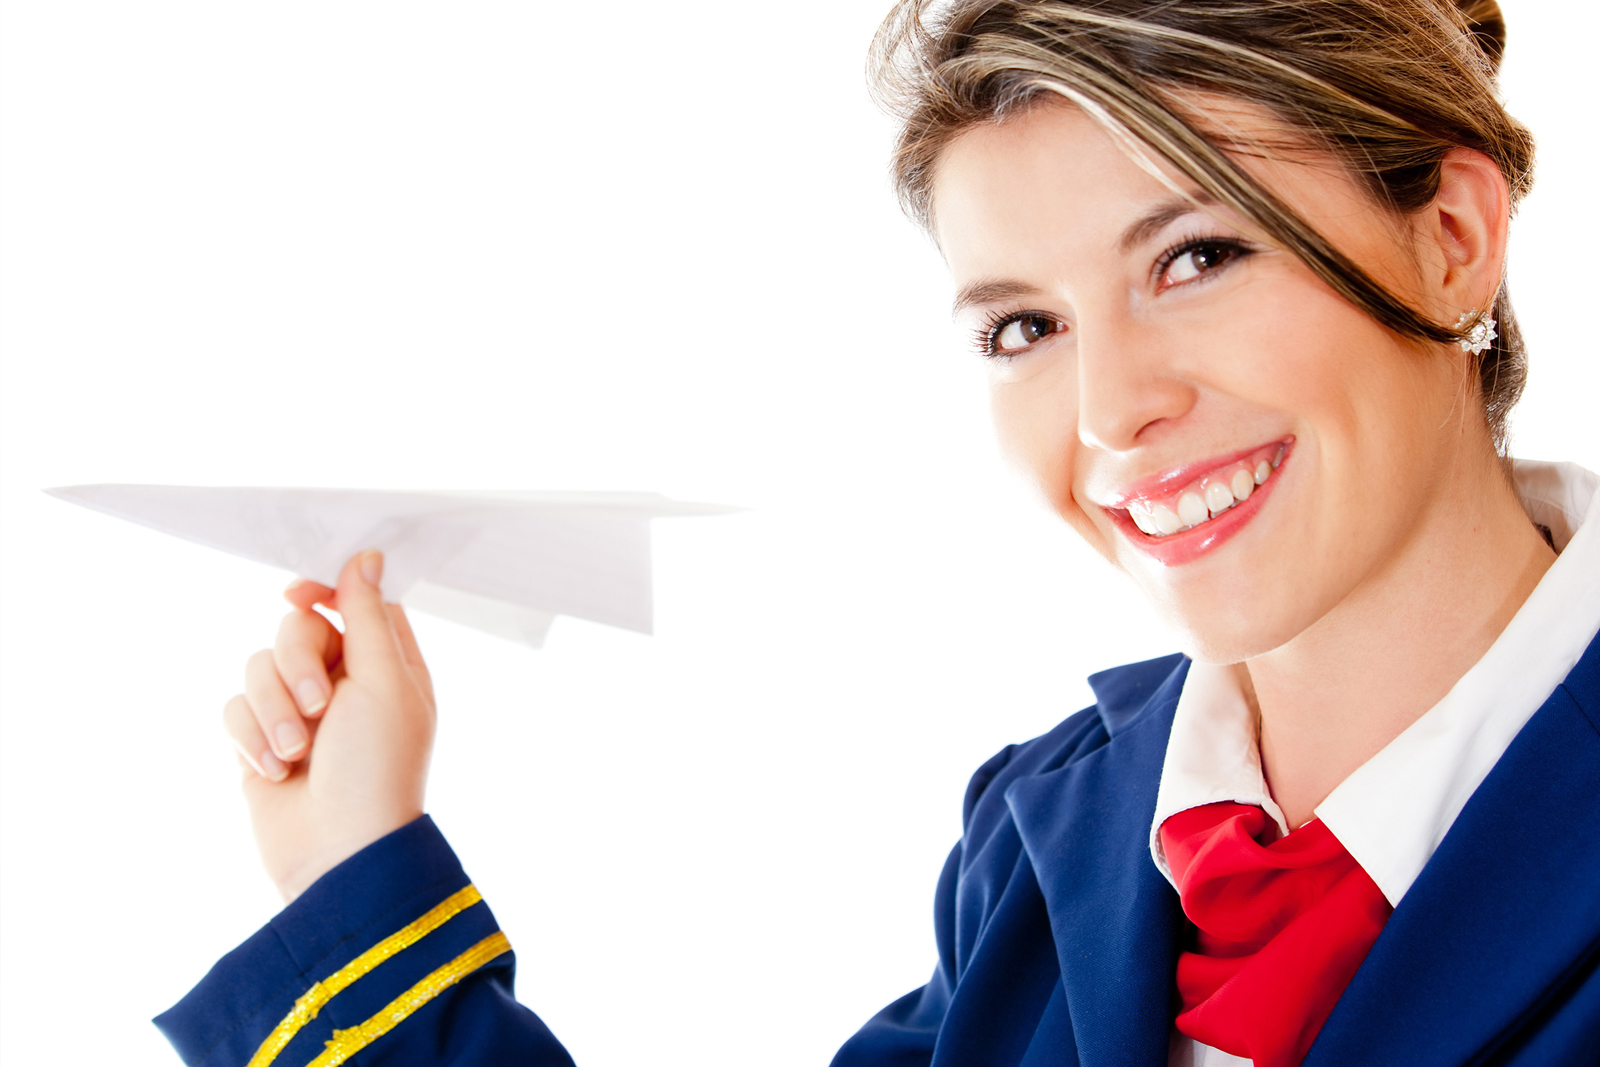 Why People Prefer to Be Flight Attendants